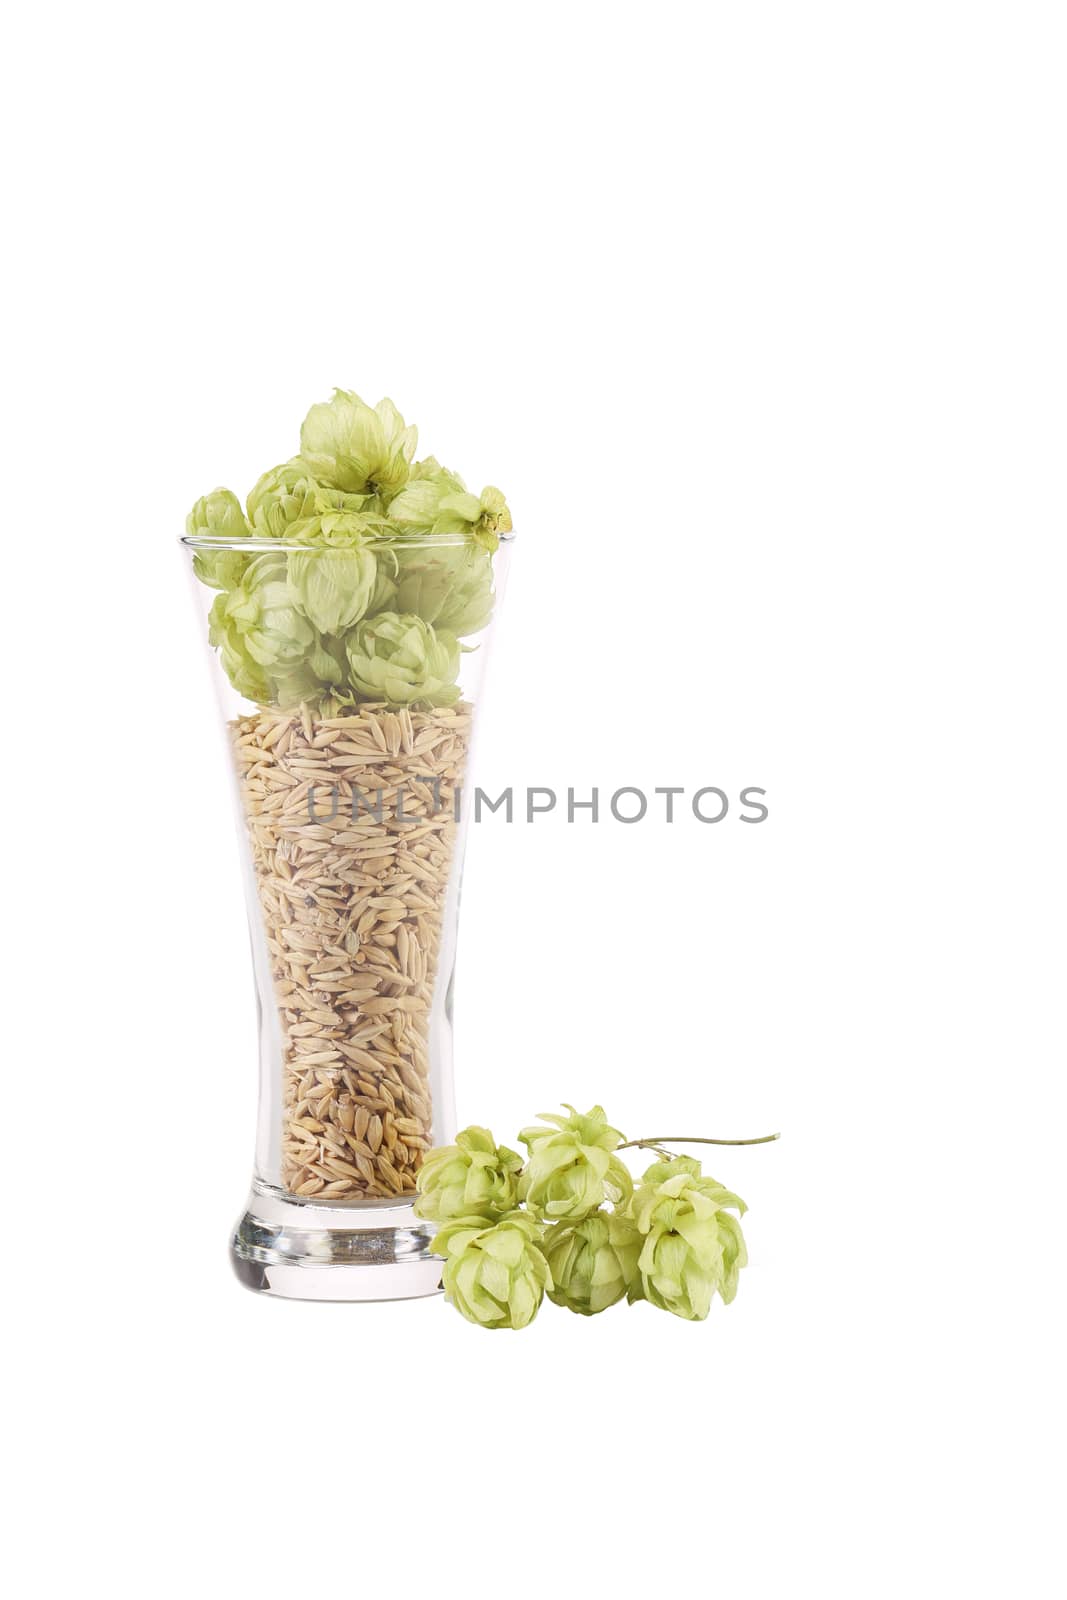 Tall glass full of grains and hop. Isolated on a white background.